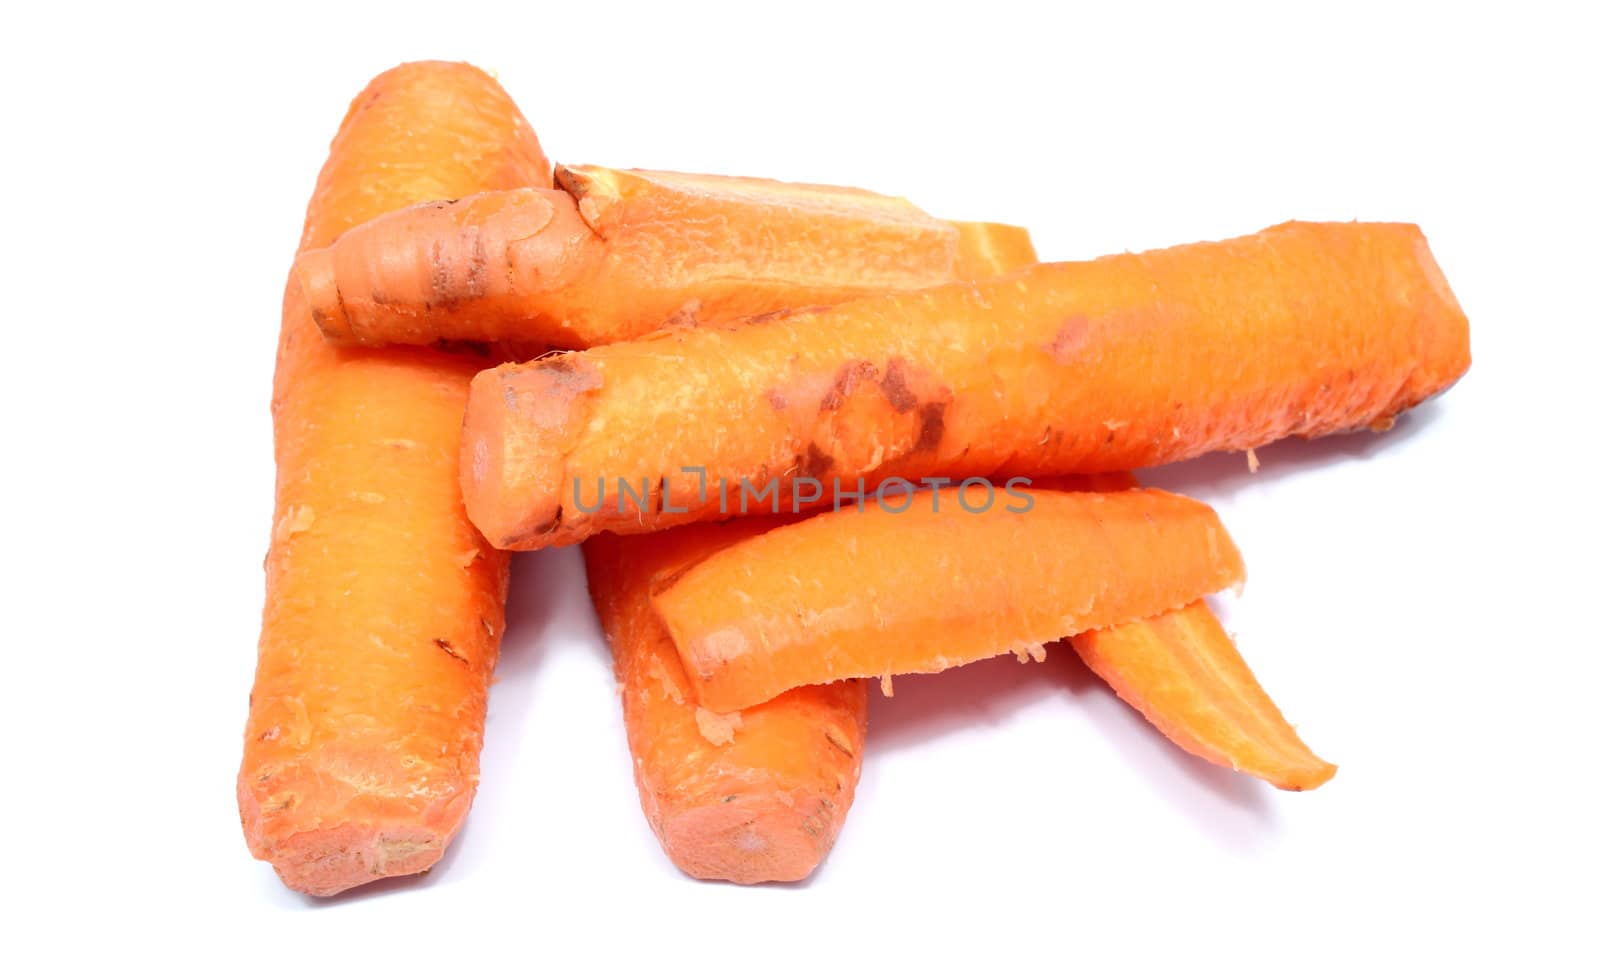 bunch of boiled carrots over white background